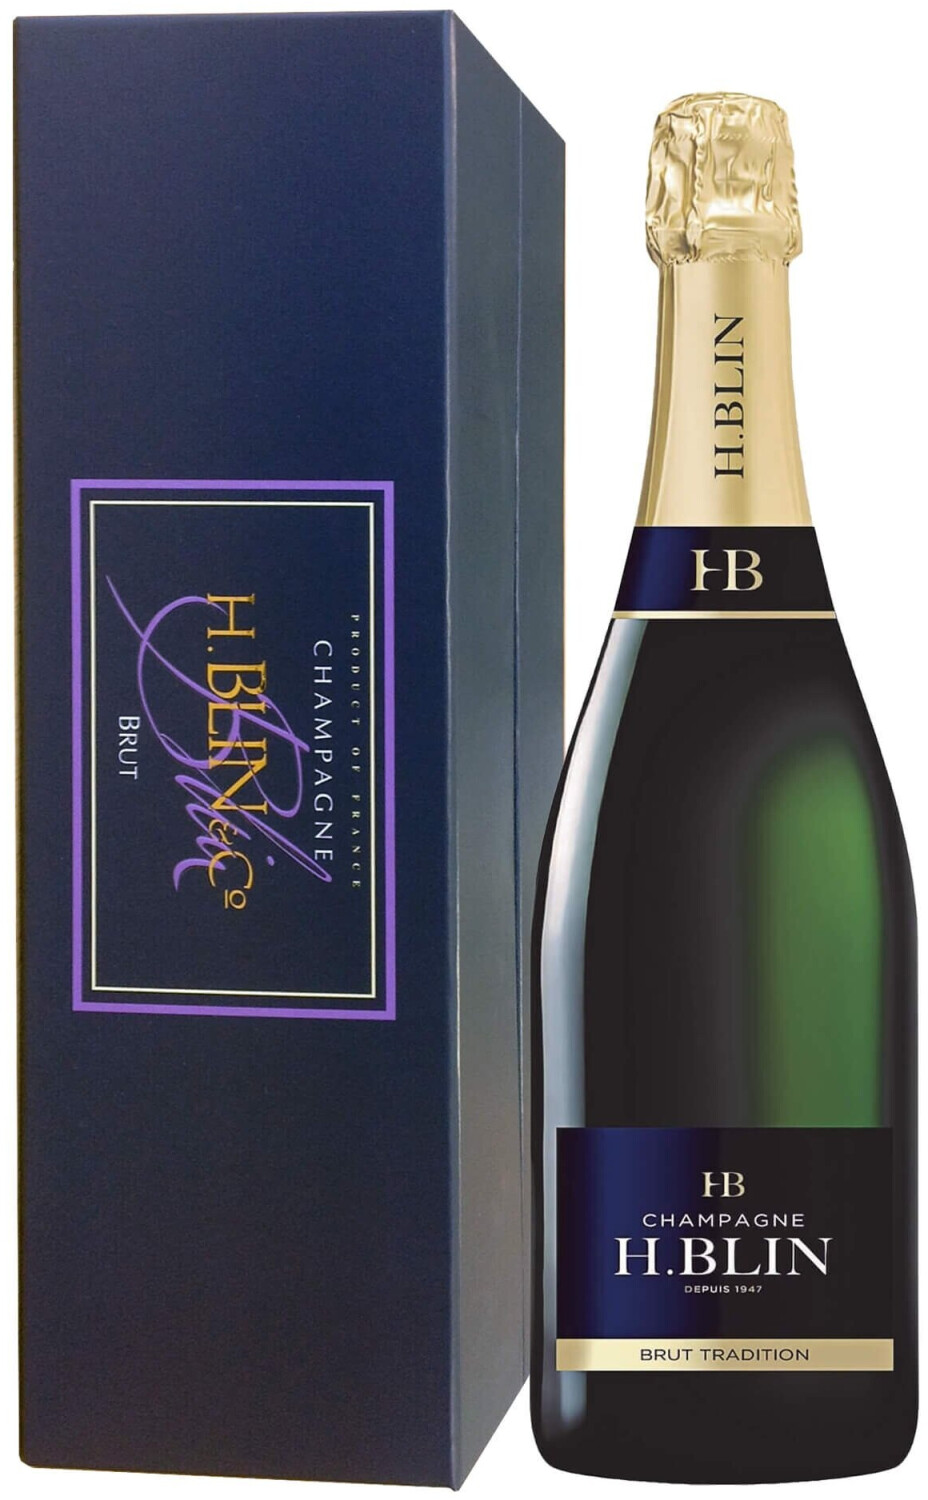 Champagne Blin Brut Tradition